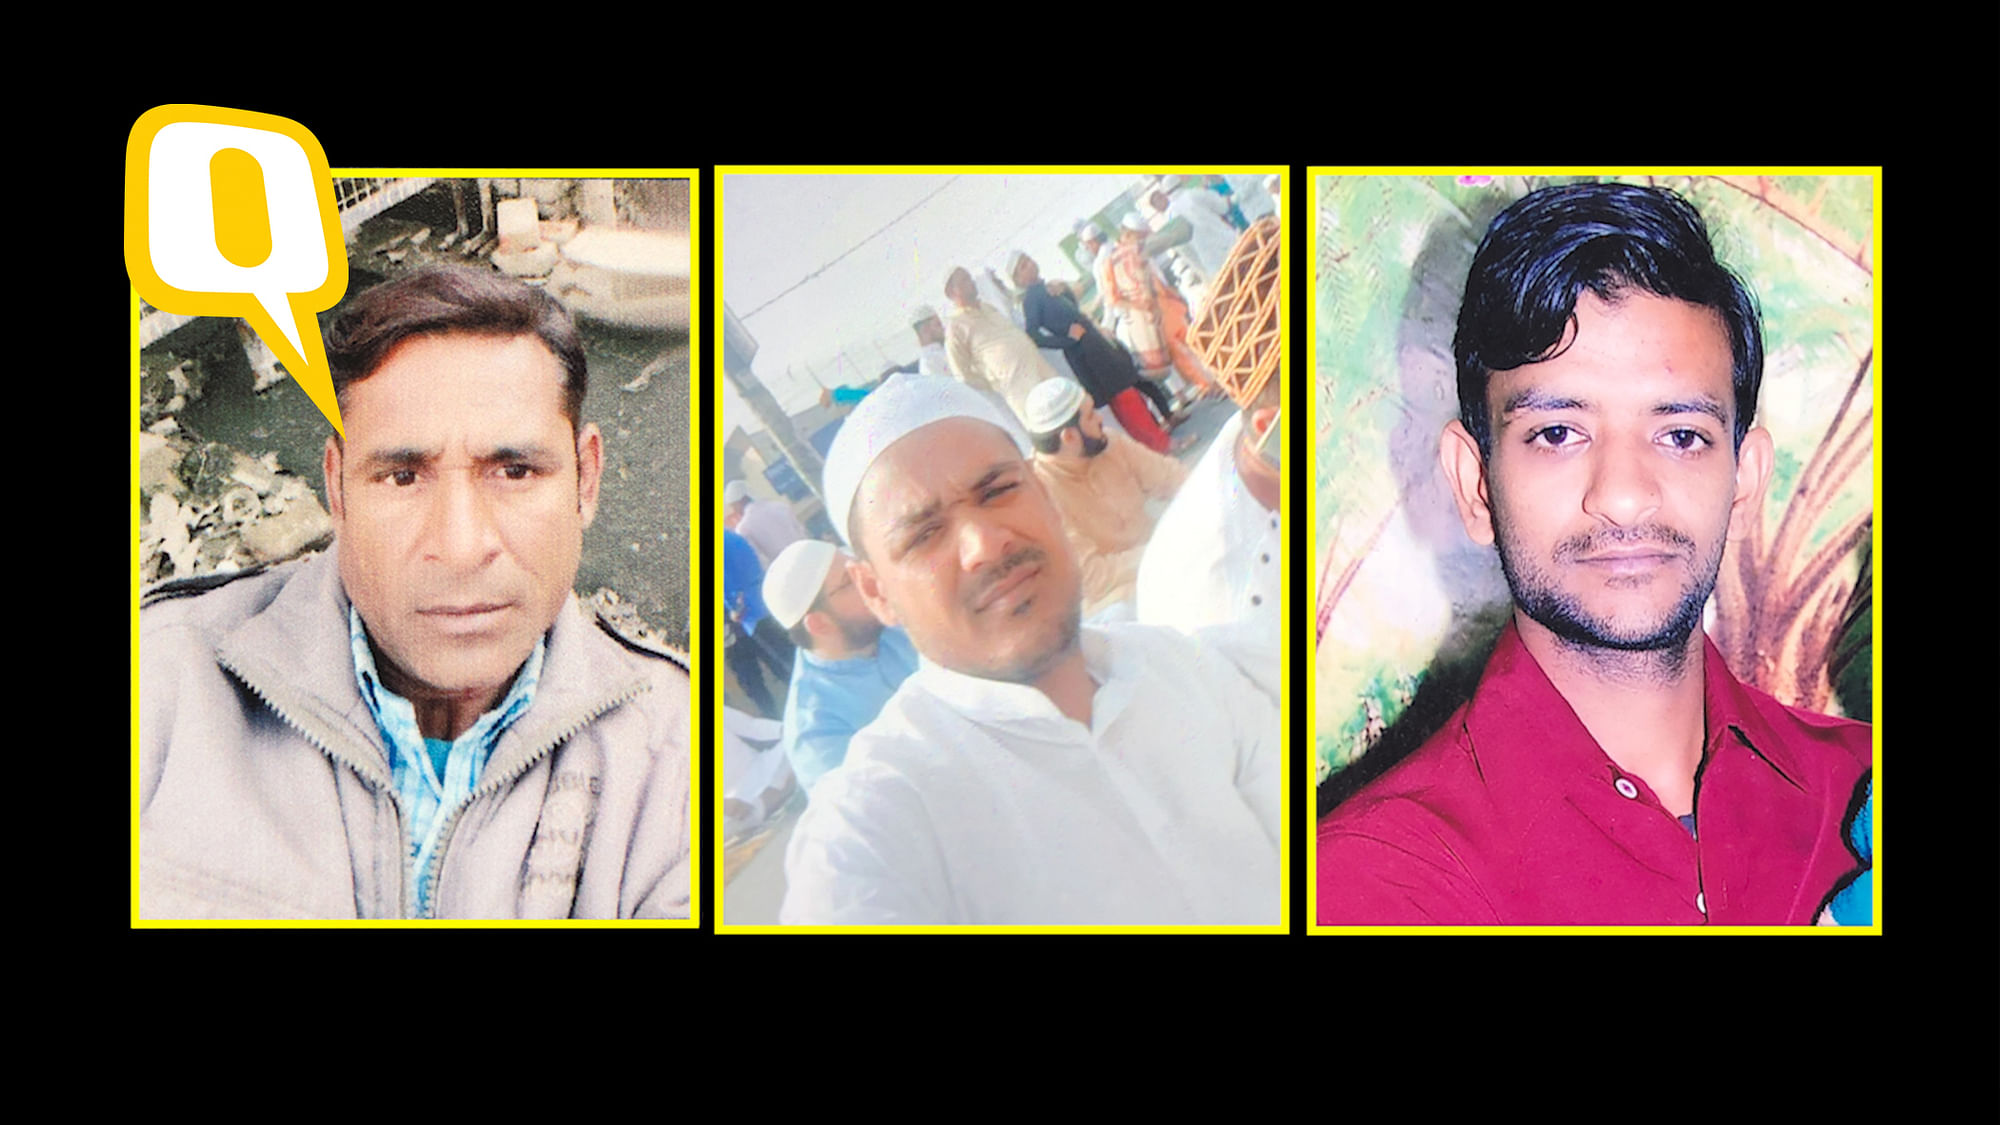 At least 5 people lost their lives, during a protest against the Citizenship Law in Meerut on 20 December.